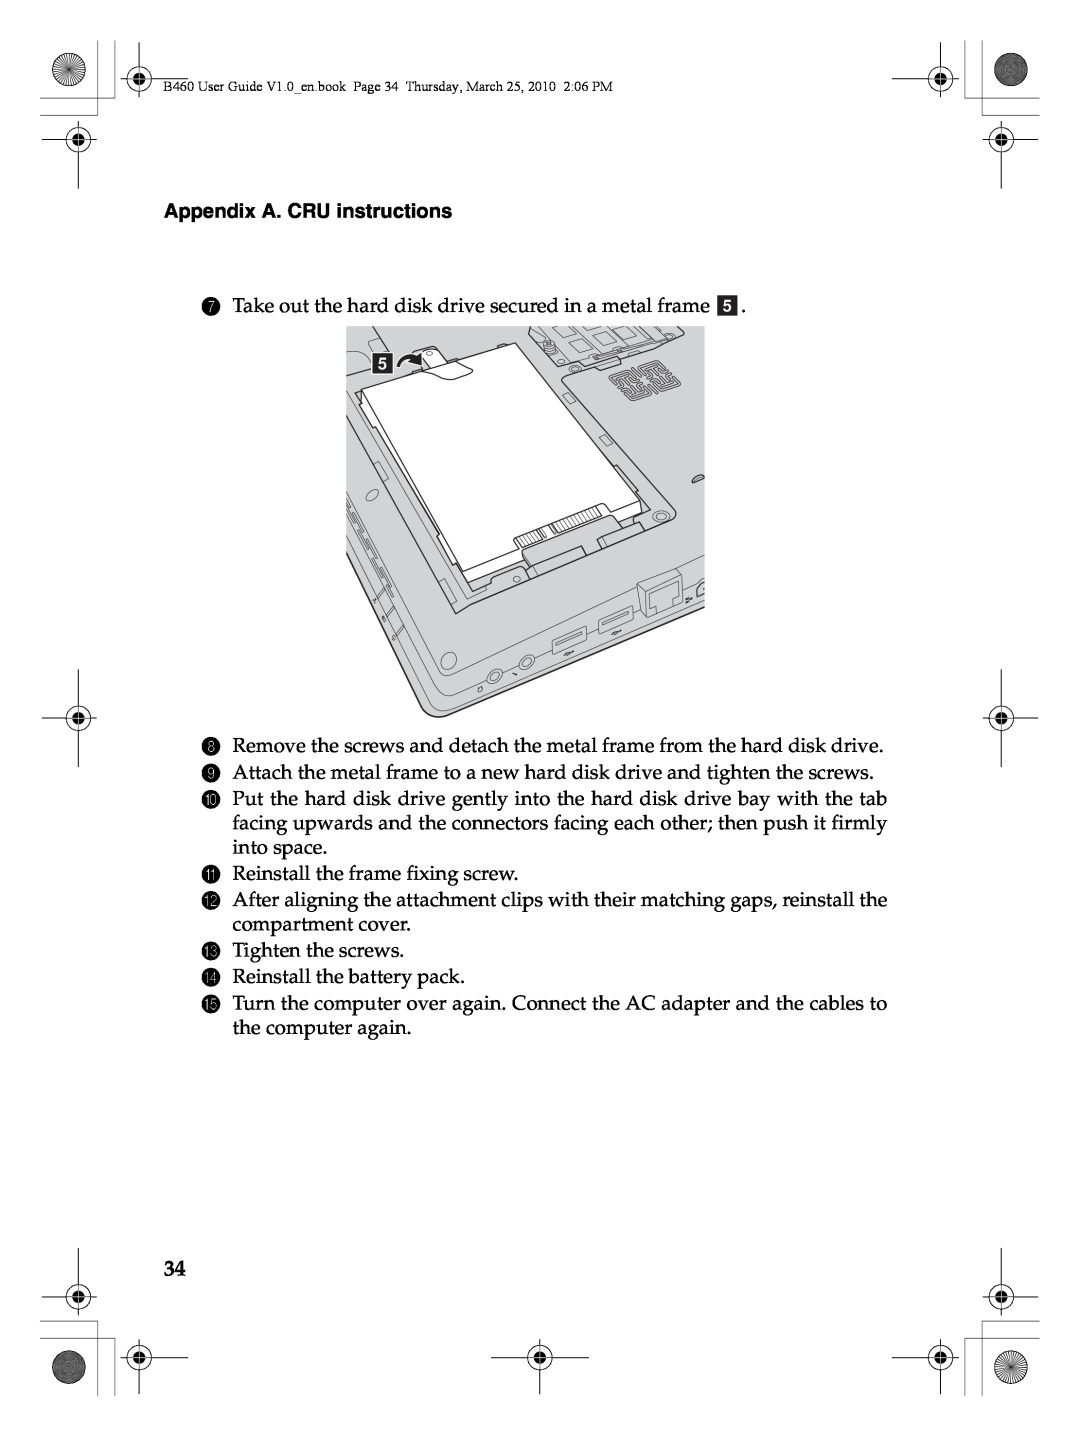 Lenovo B460 manual Appendix A. CRU instructions, Take out the hard disk drive secured in a metal frame e. e 